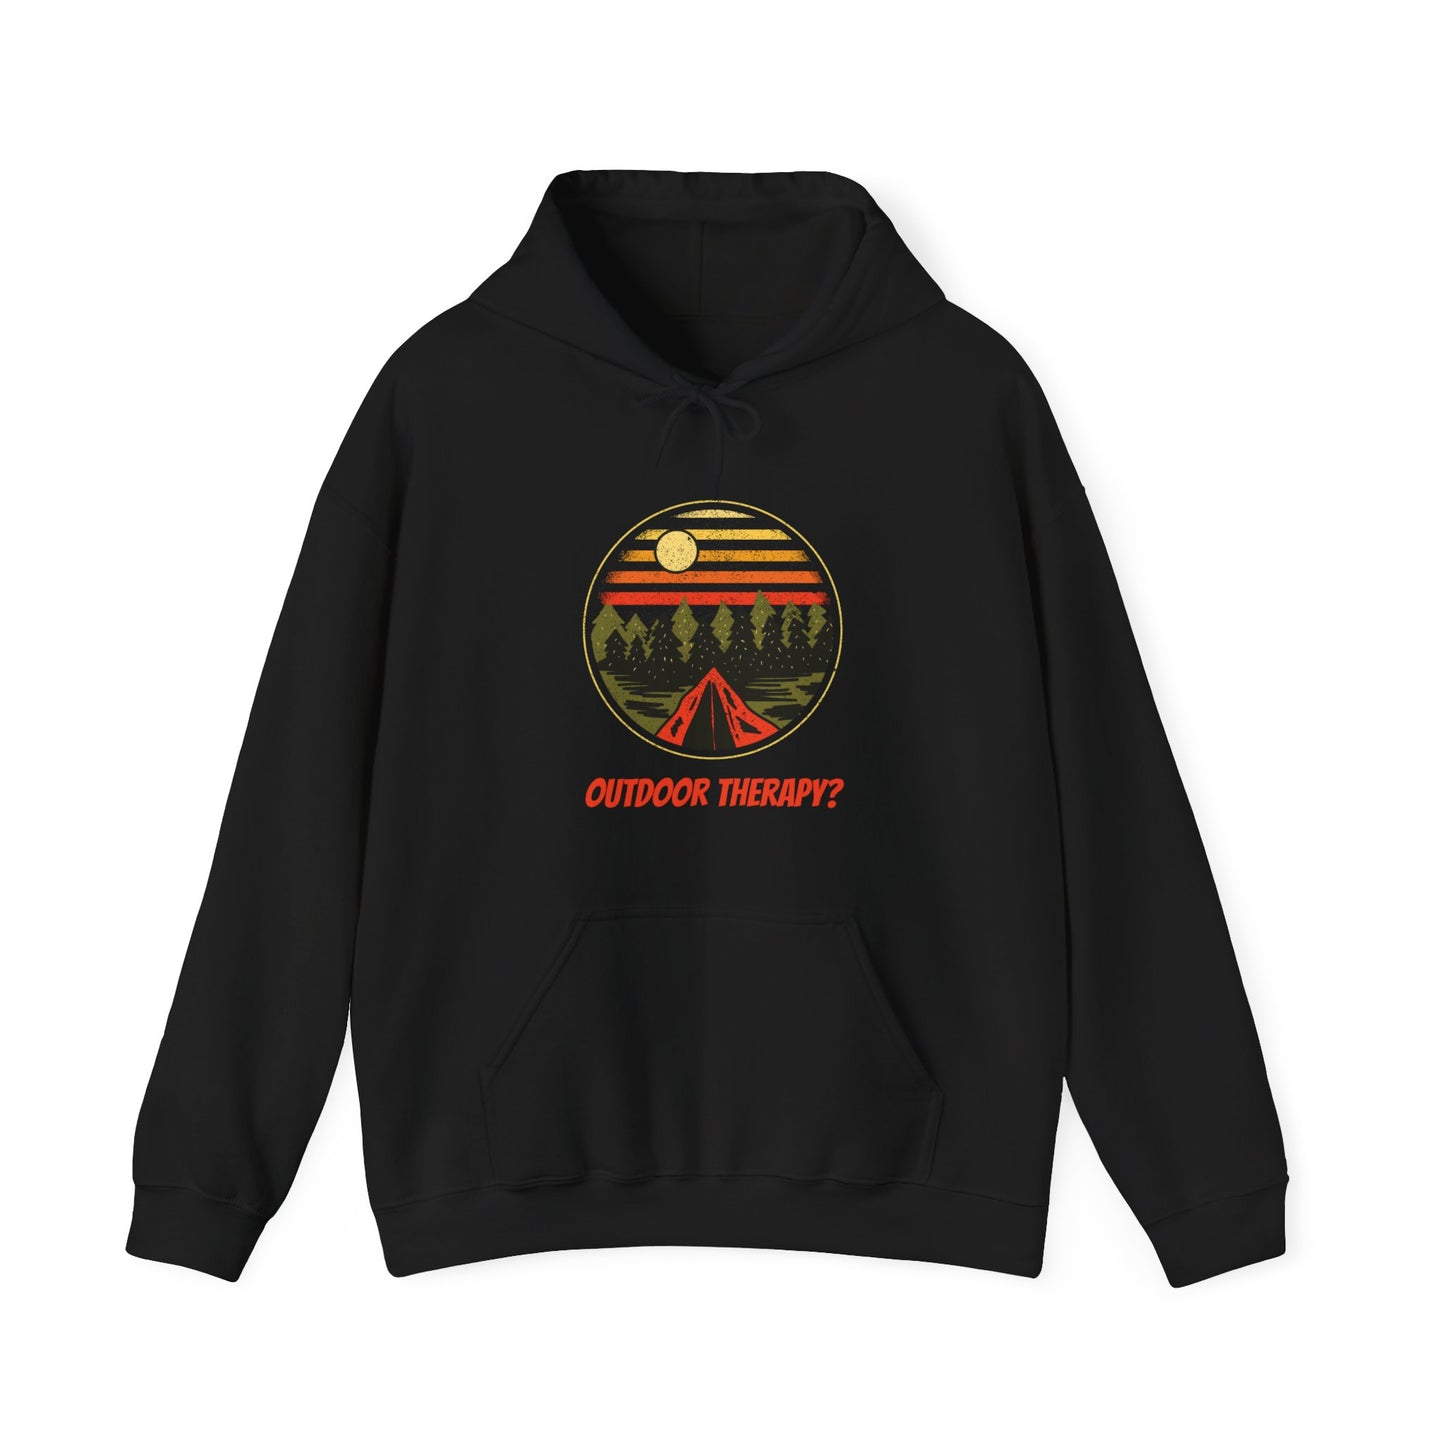 Outdoor Therapy? Unisex Heavy Blend™ Hooded Sweatshirt